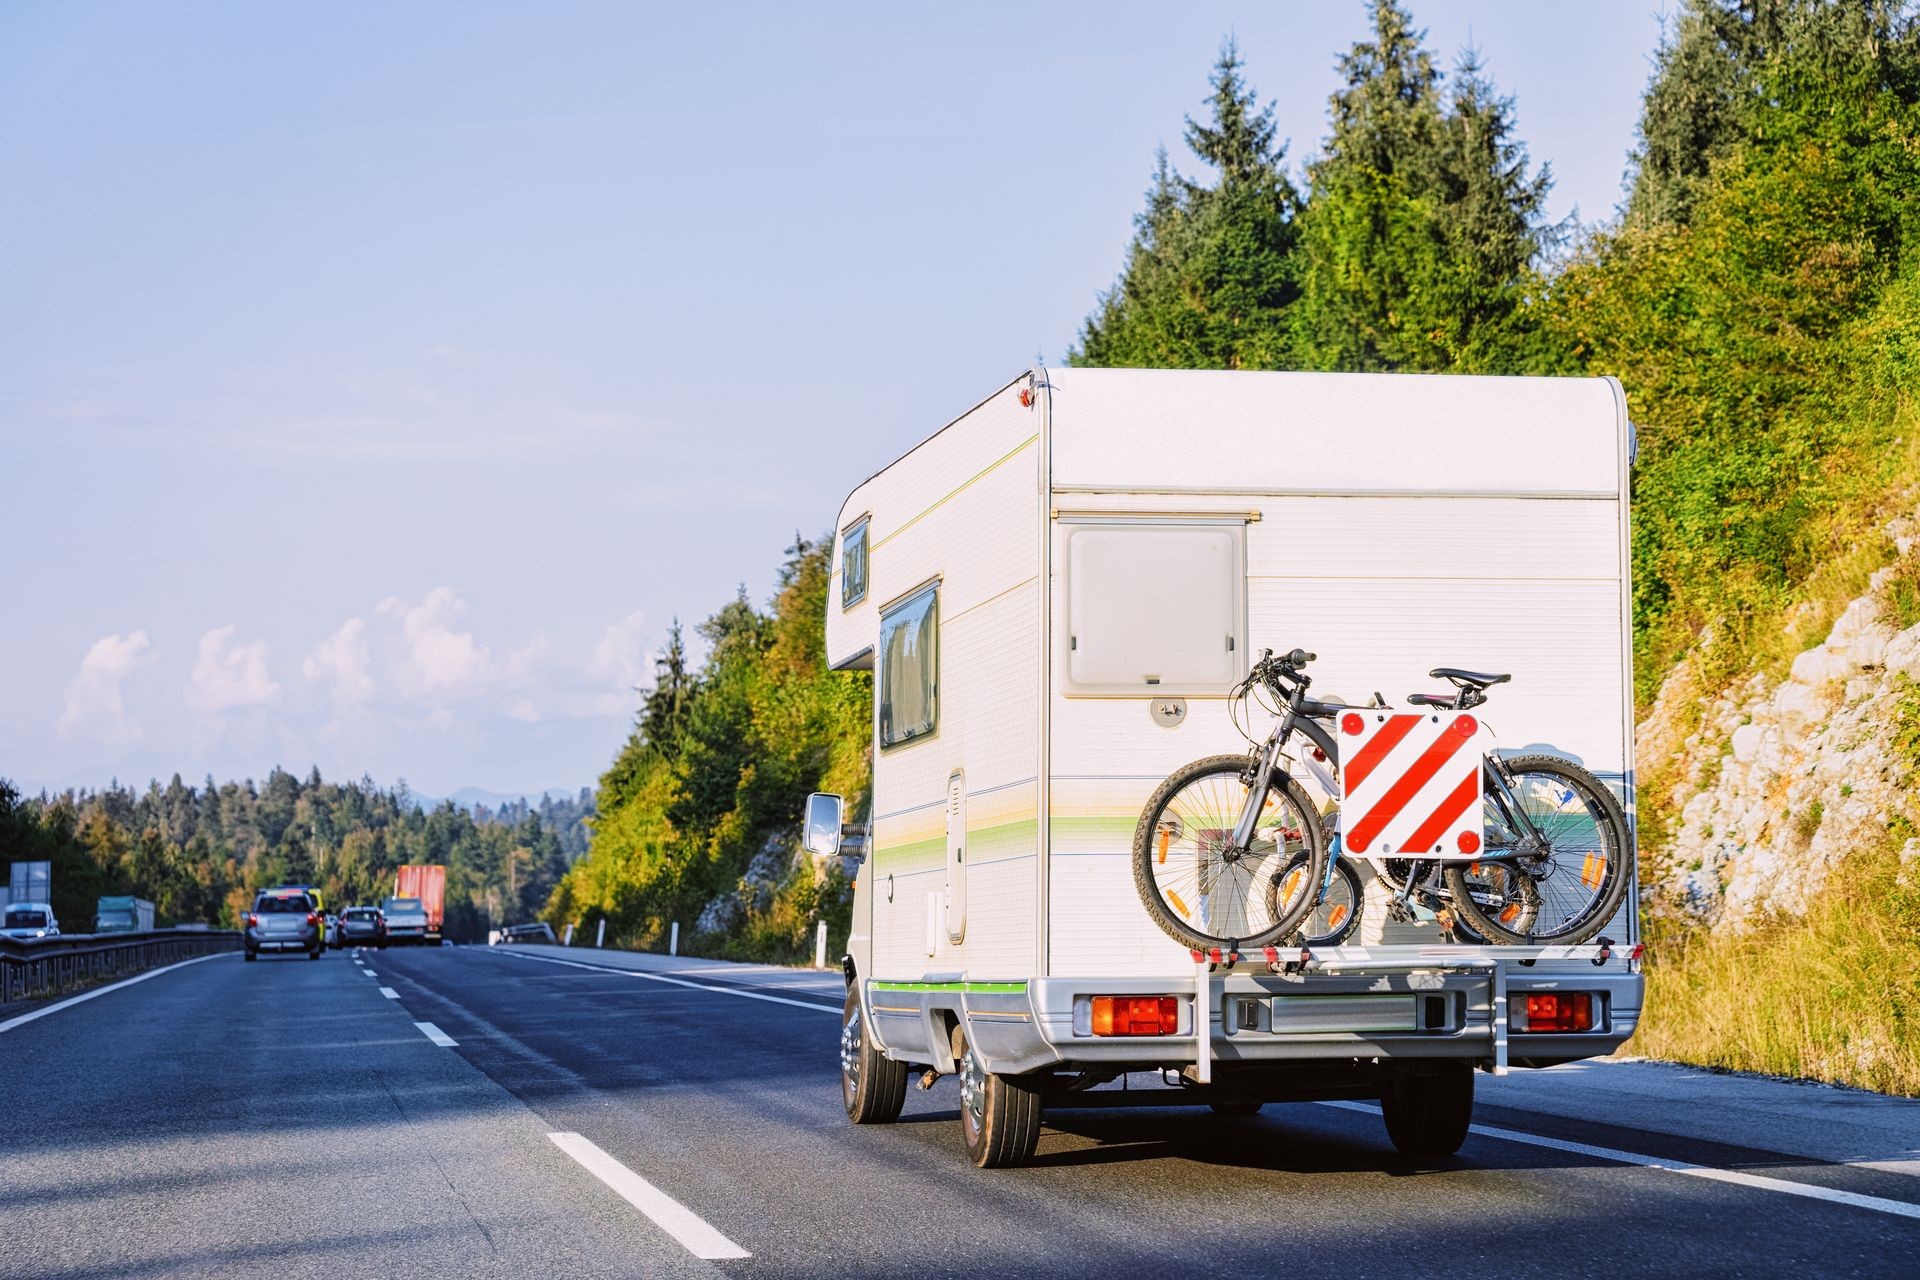 Camper rv abd bicycle on the road in Slovenia.